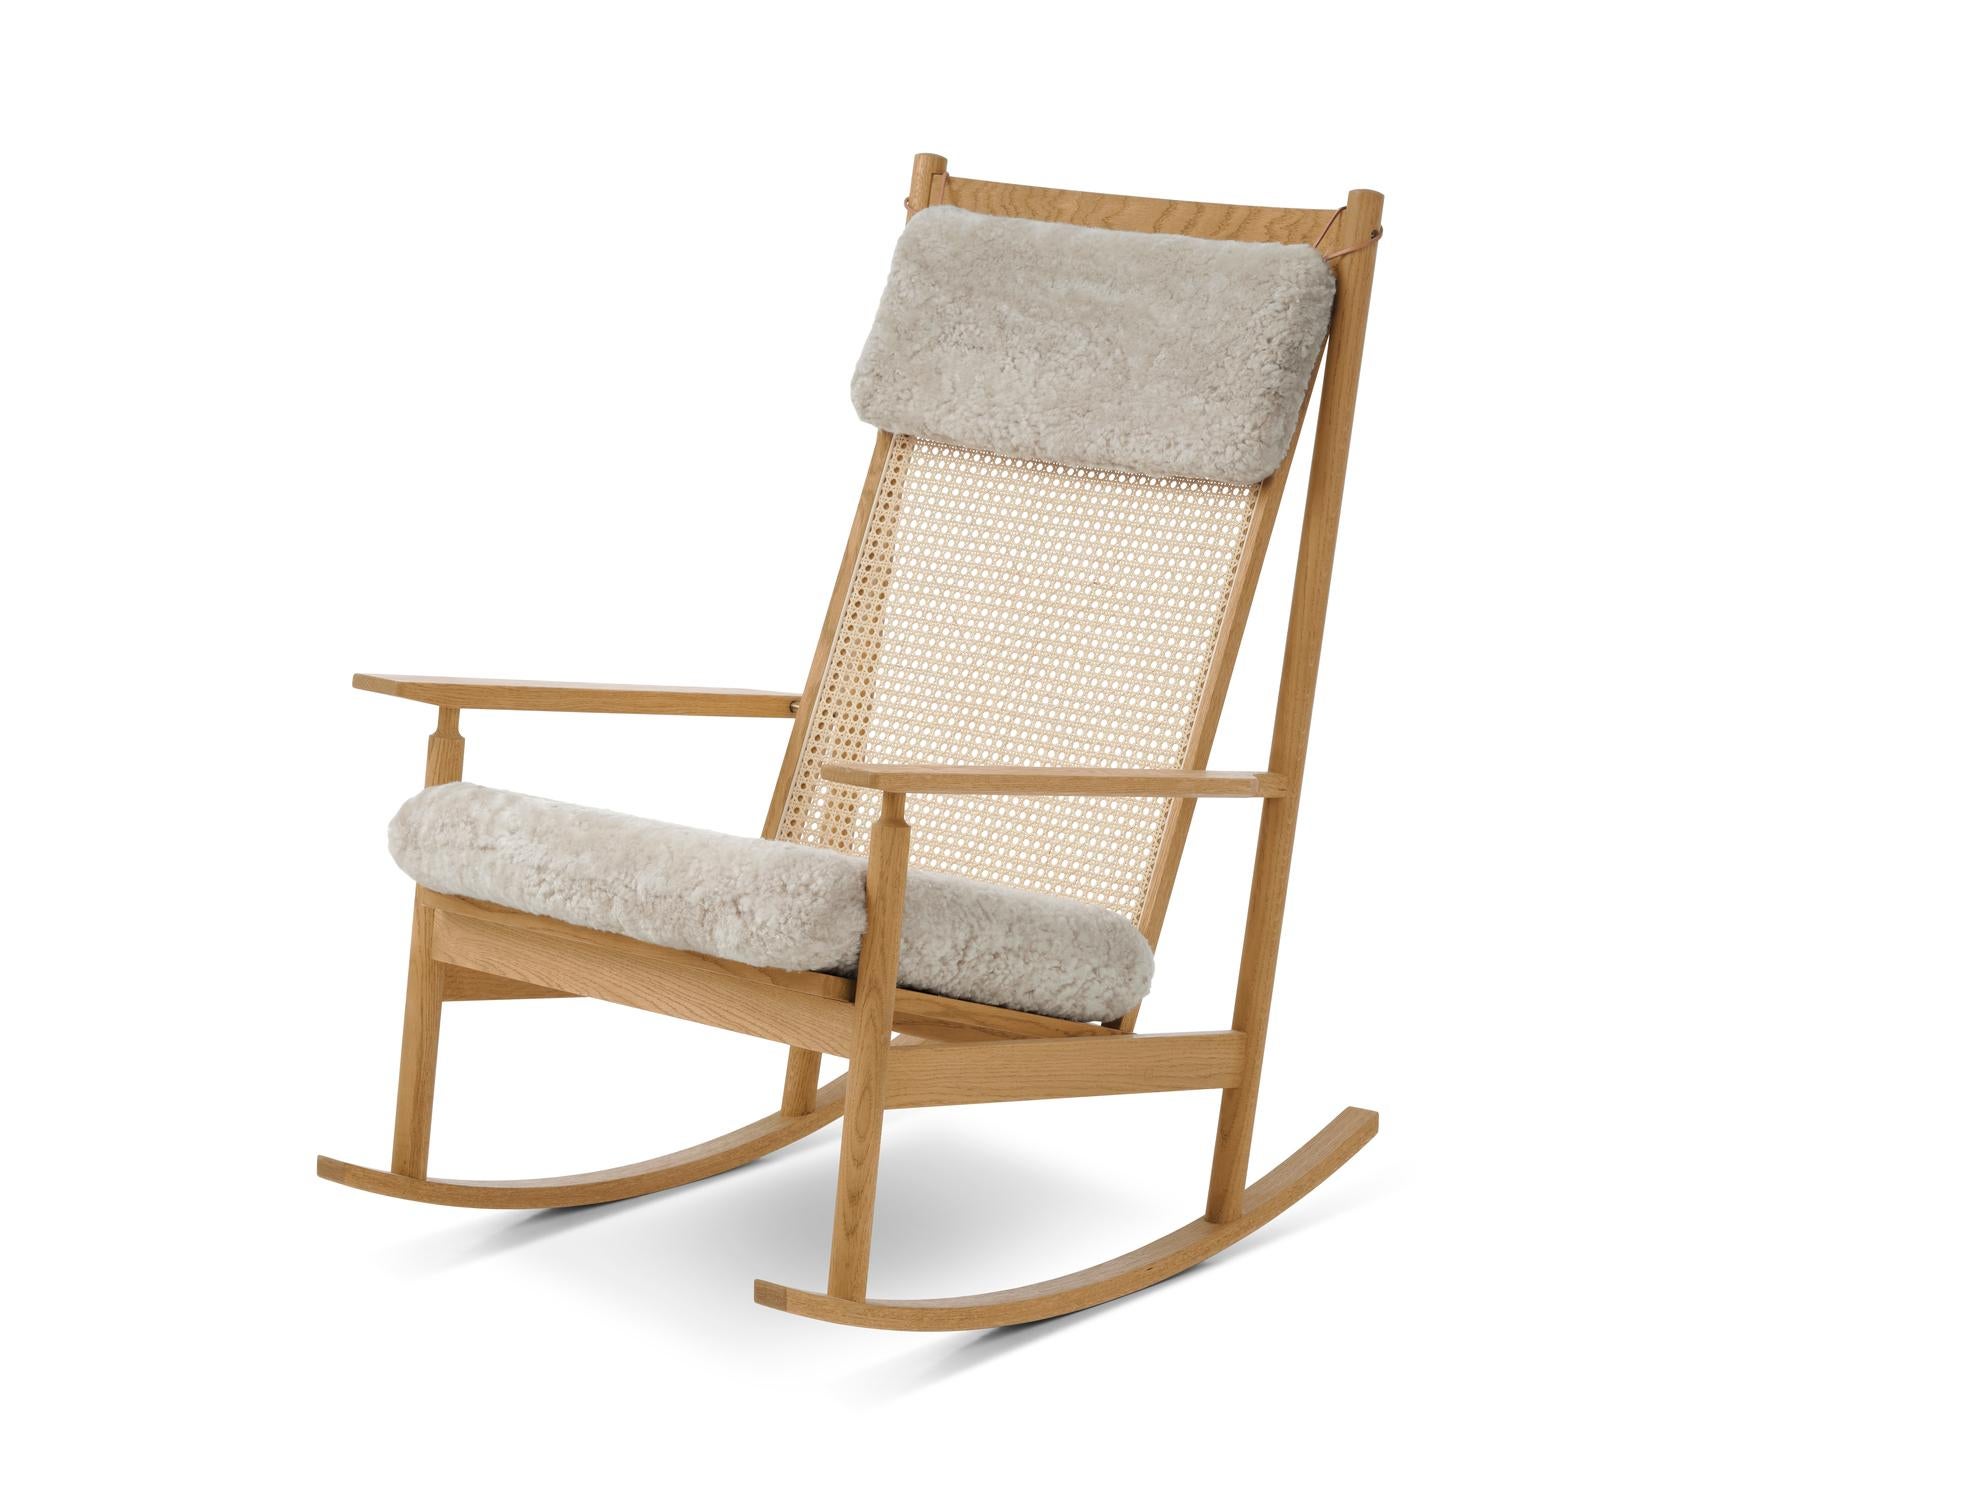 Swing rocking chair sheepskin oak moonlight by Warm Nordic
Dimensions: D91 x W68 x H 103 cm
Material: Wood, Foam, Rubber springs, French cane, Textile or leather upholstery, Oak, Sheepskin upholstery
Weight: 16.5 kg
Also available in different